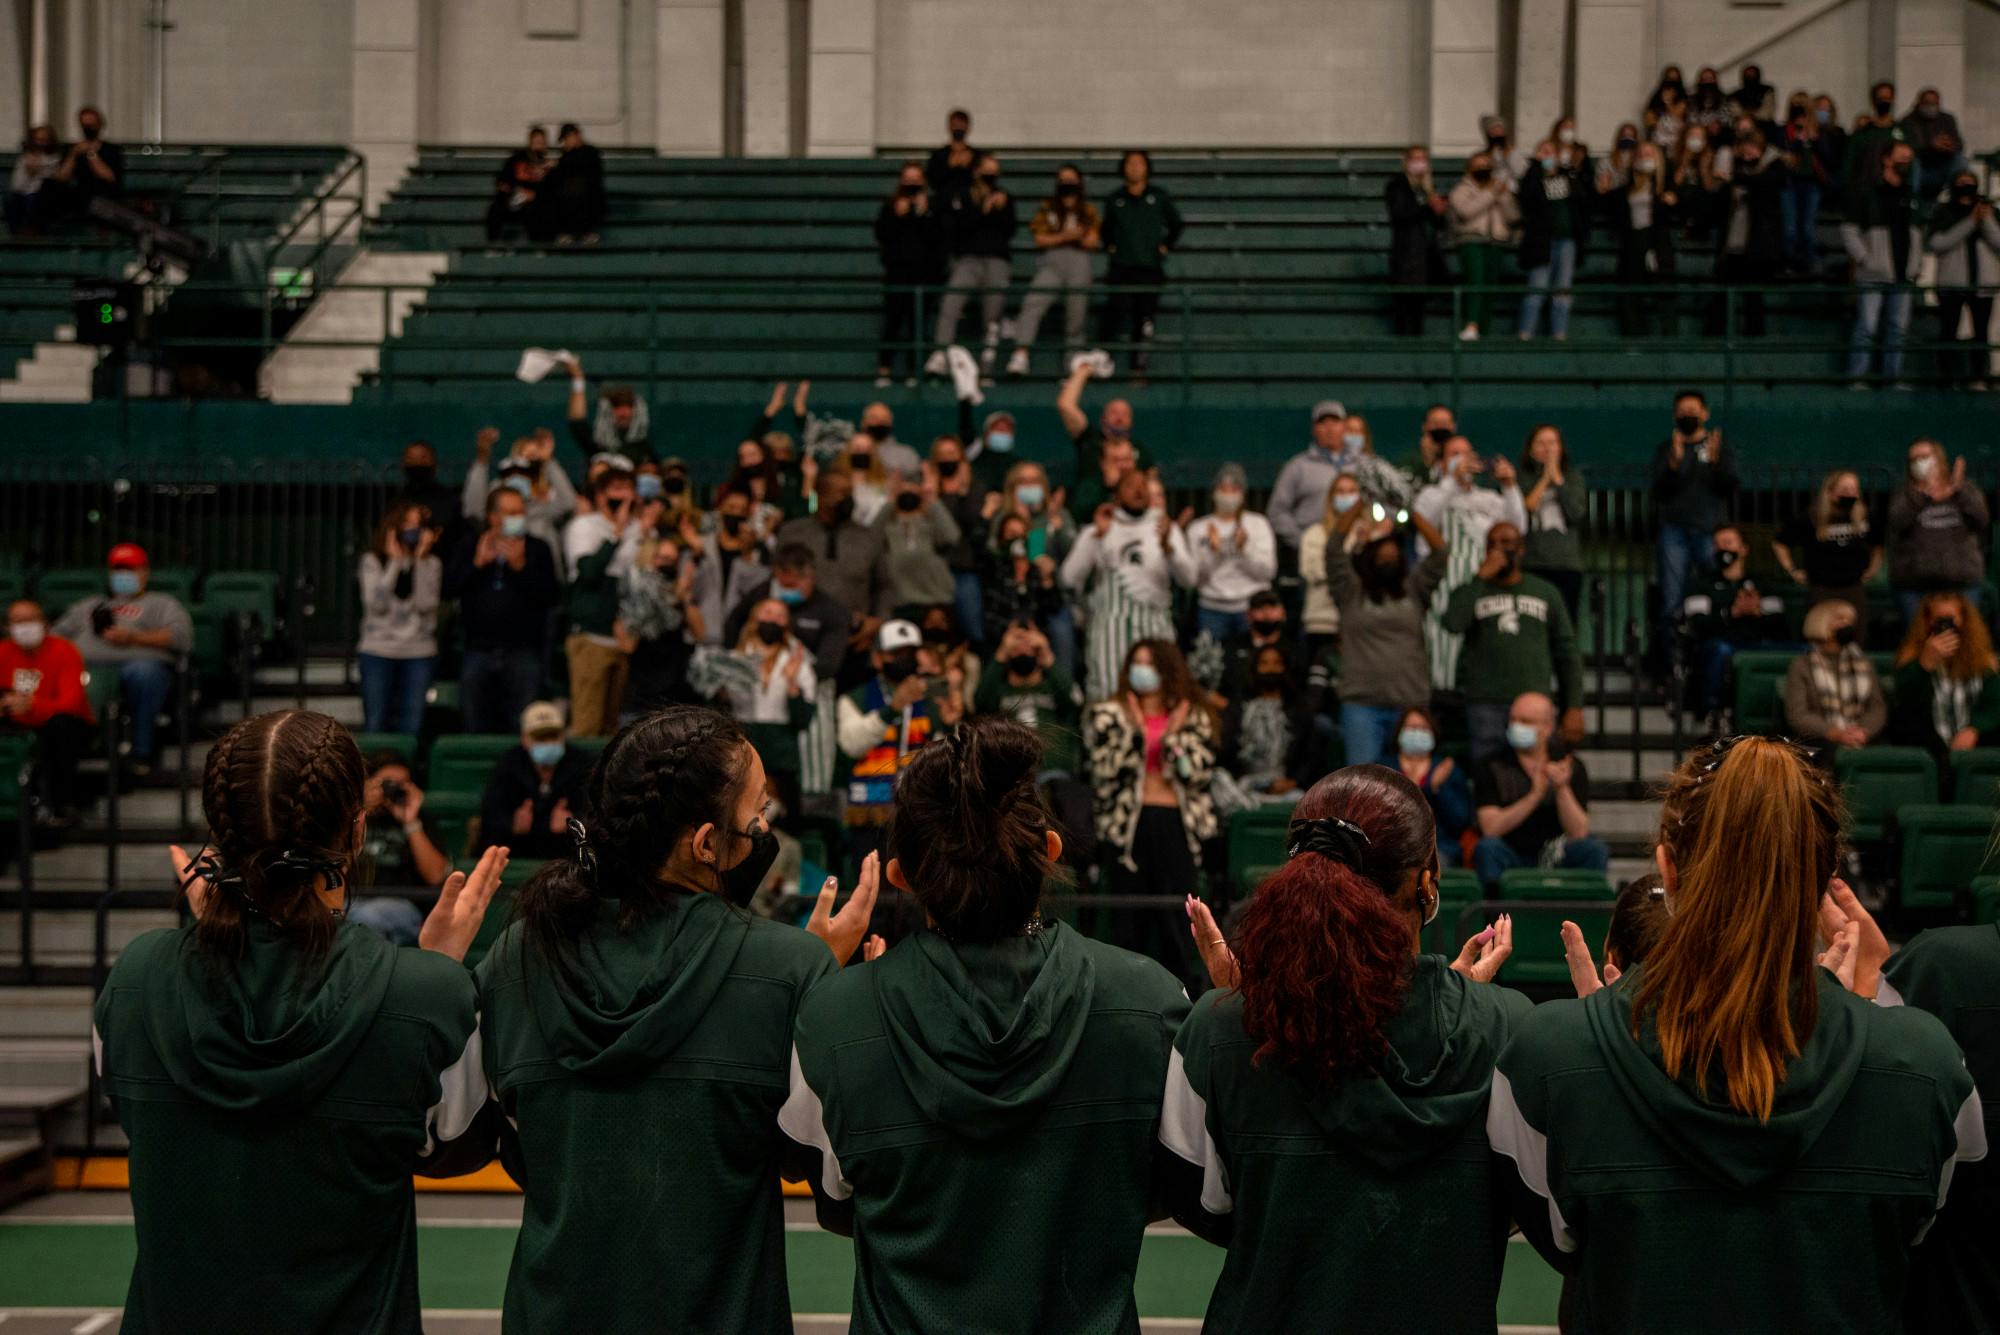 <p>The MSU Women&#x27;s Gymnastics team receives applause from the crowd after their win at Jenison Field House on Jan. 15, 2022.</p>